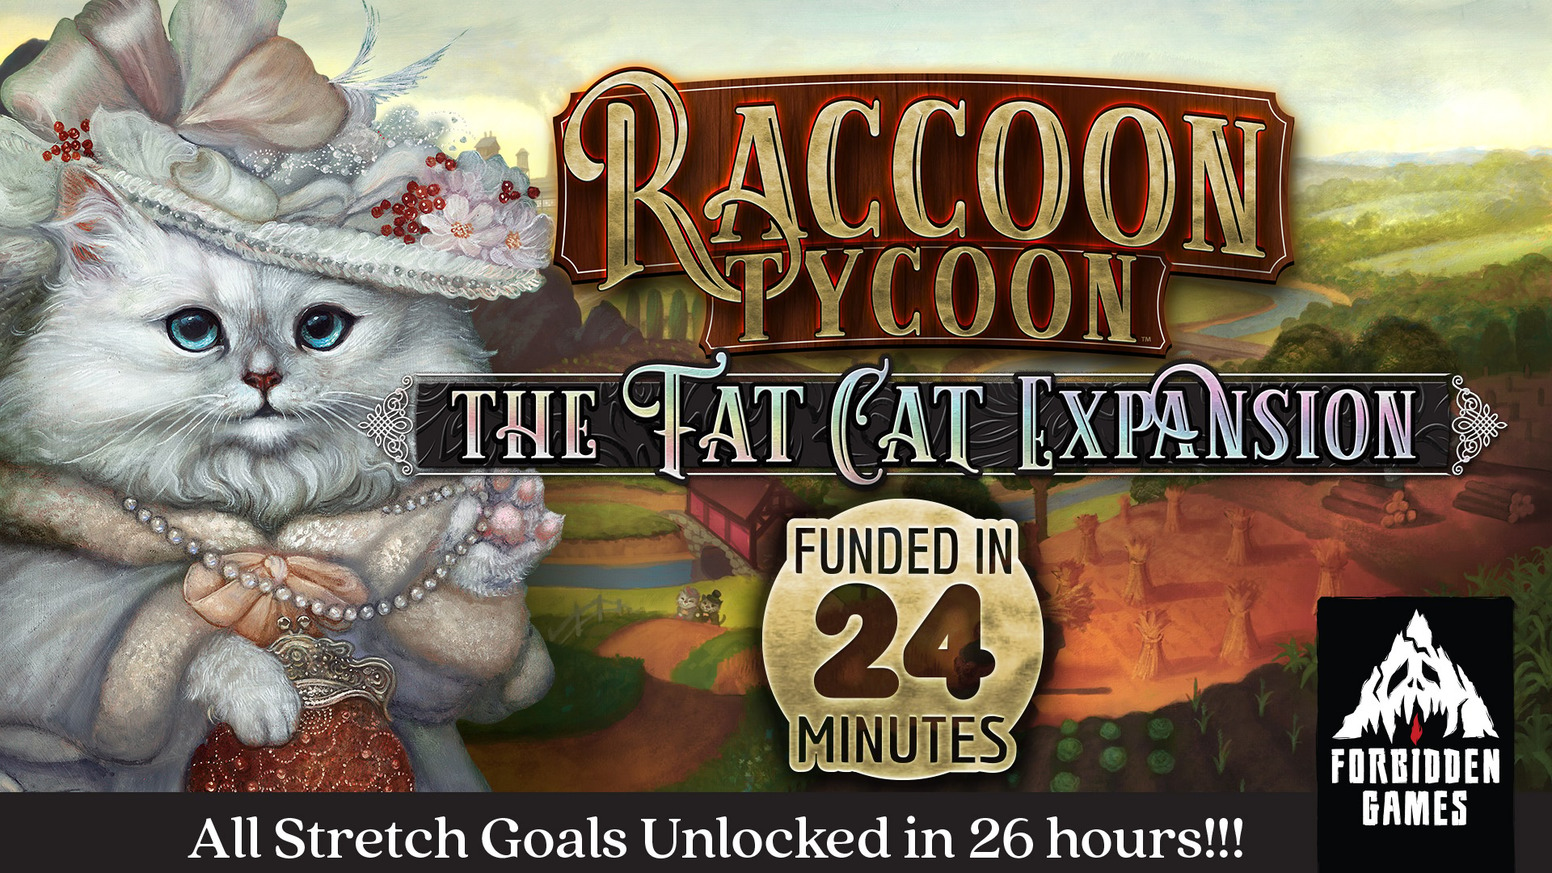 Upgrade your casual Raccoon into a strategic gamer Fat Cat!